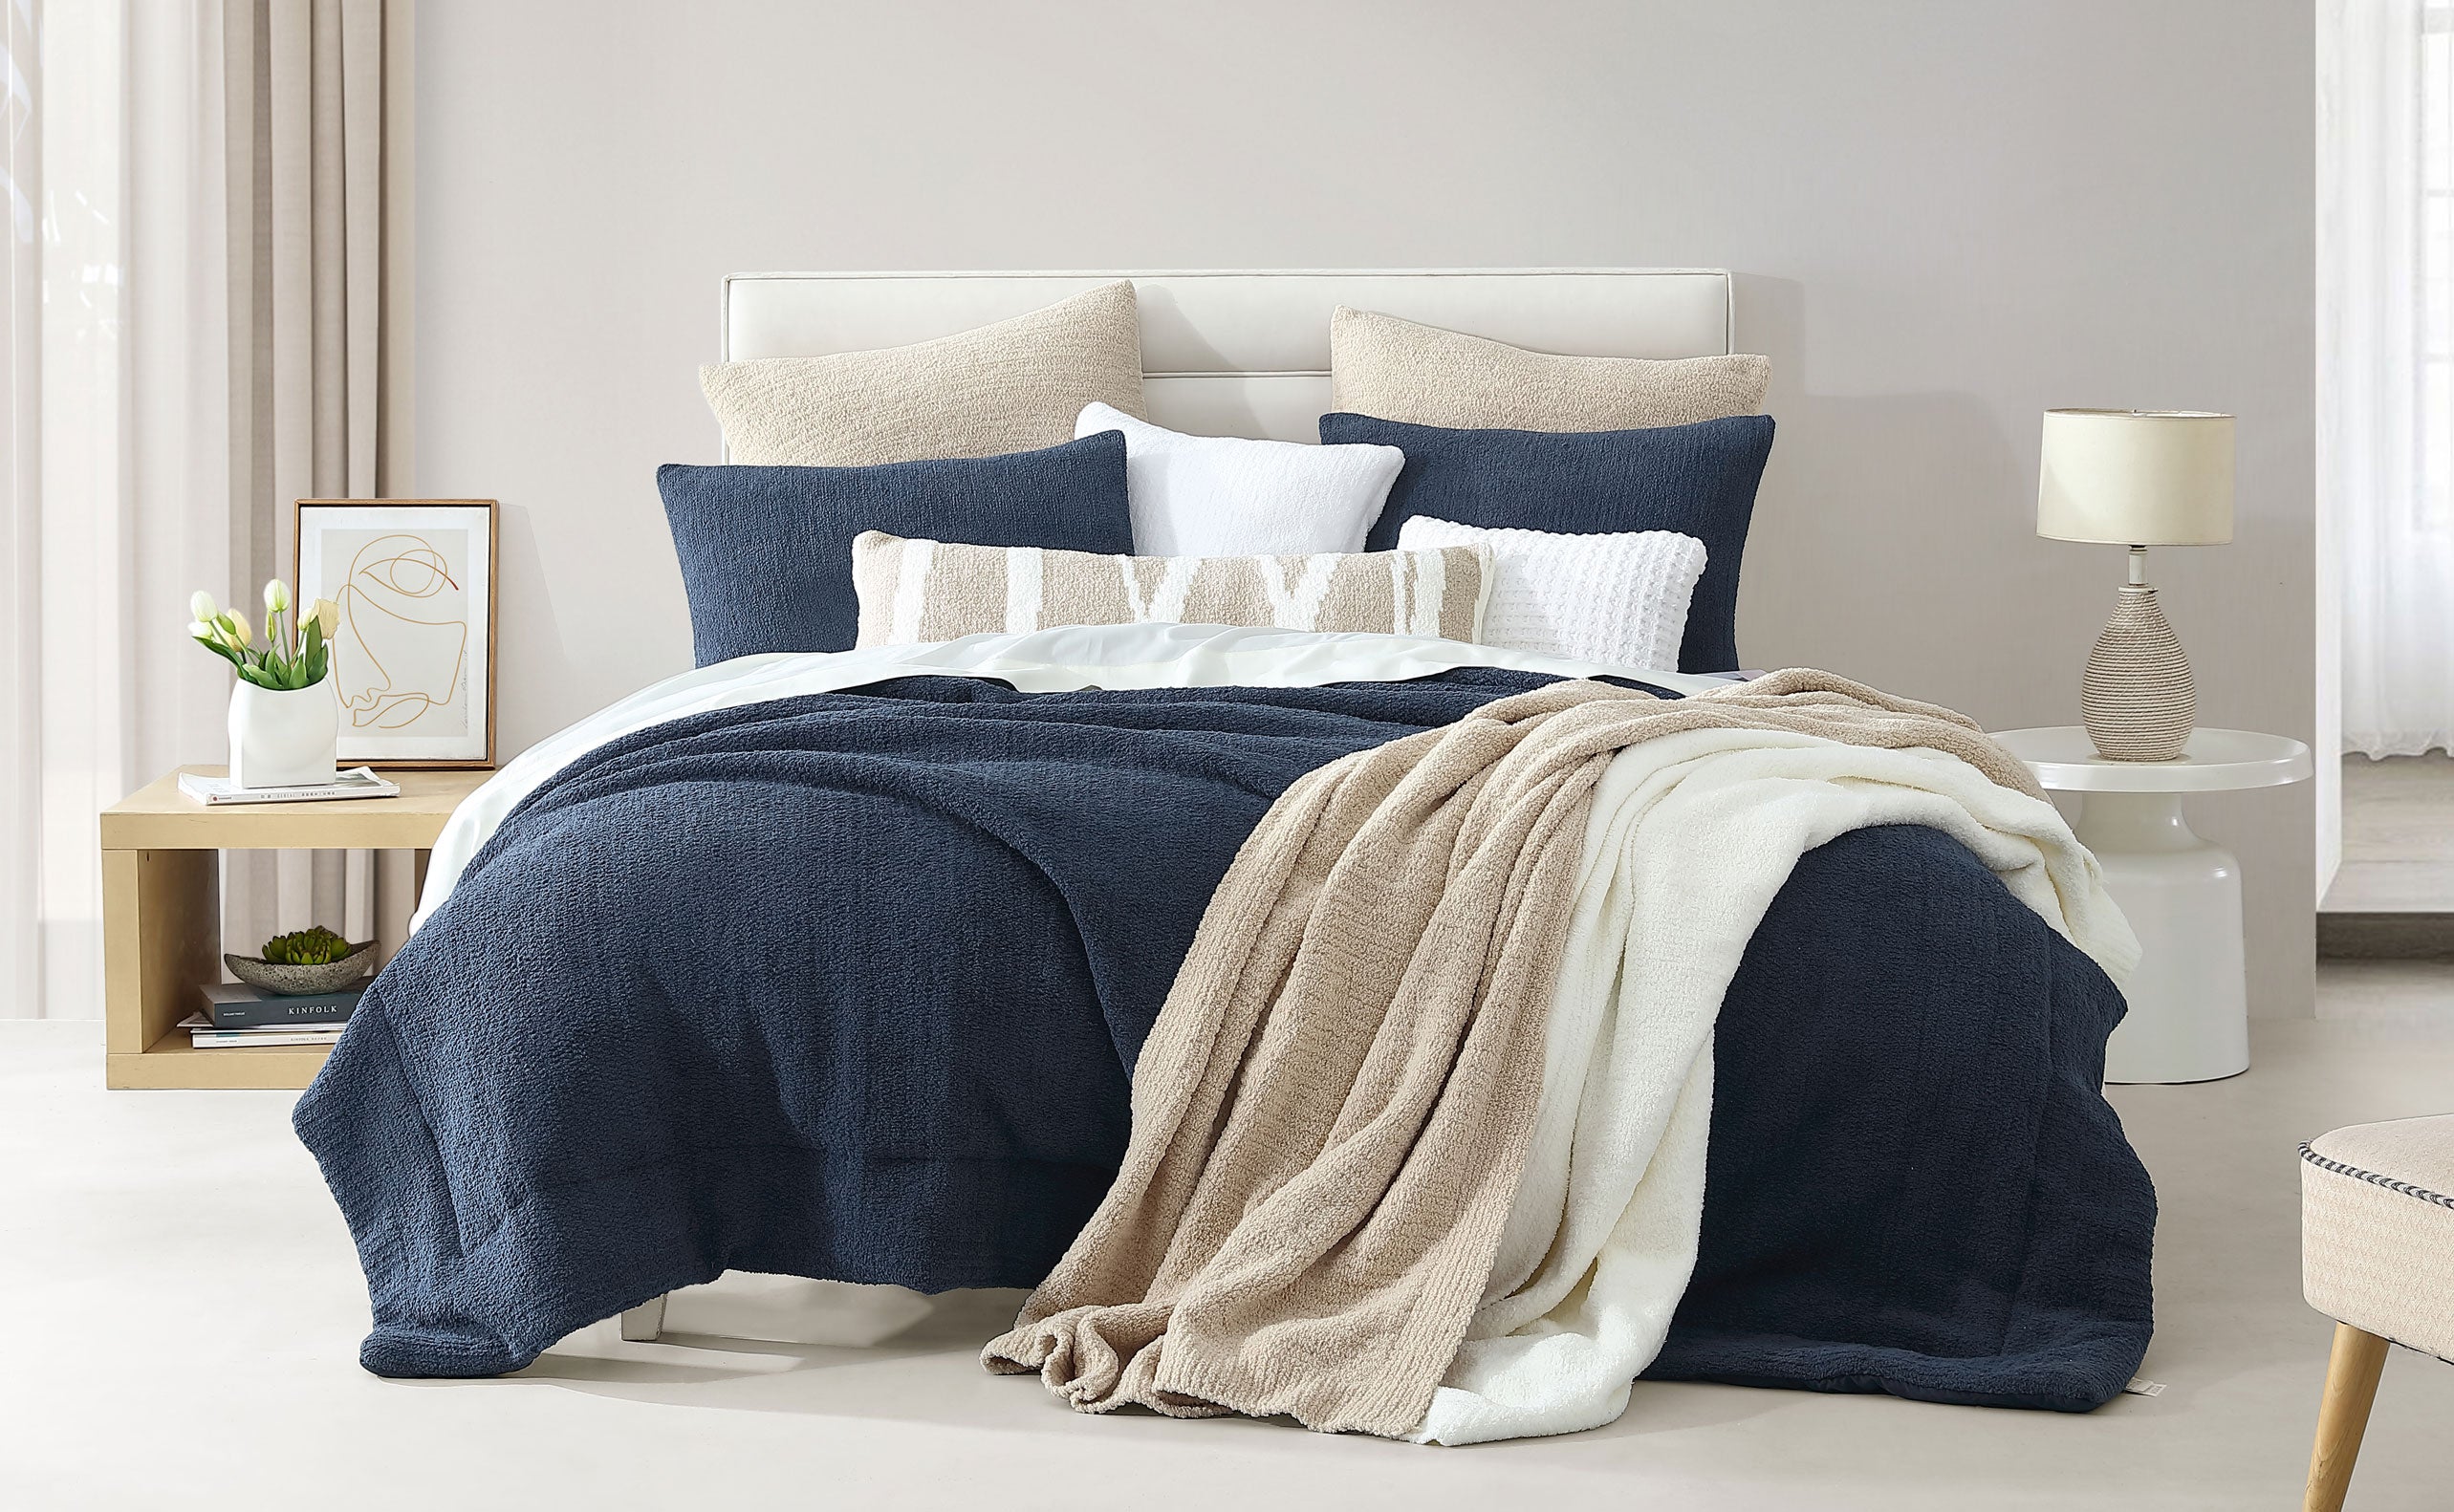 The Art of Layering: How to Style Your Bed with Throws and Blankets